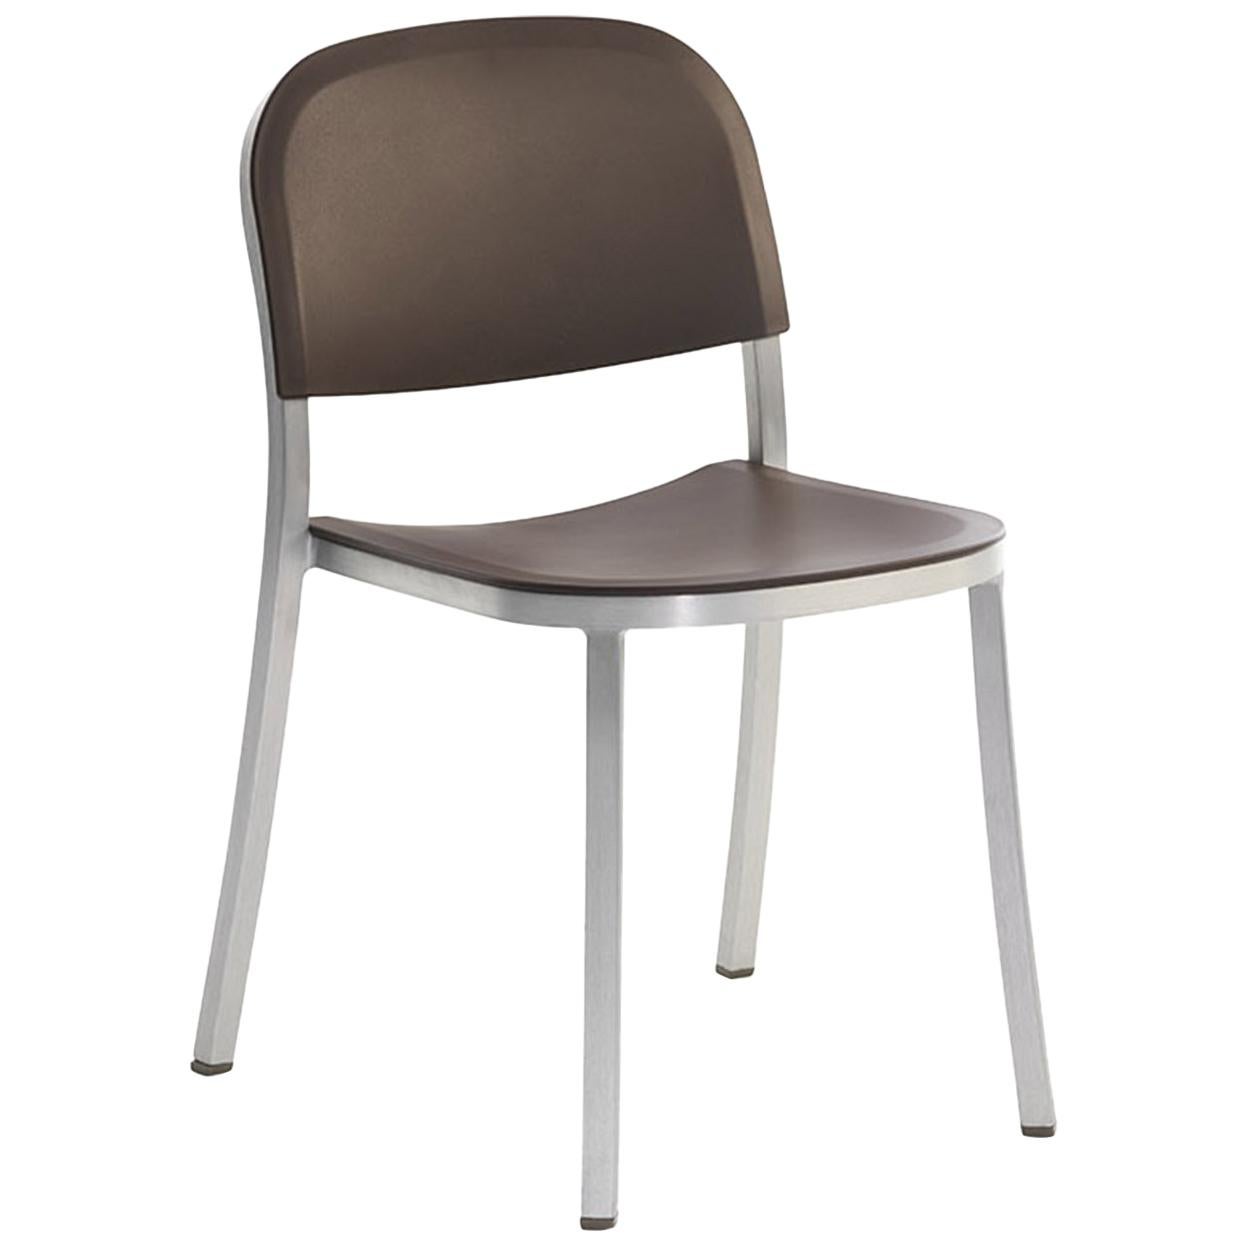 Emeco 1 Inch Stacking Chair in Brushed Aluminum and Brown by Jasper Morrison For Sale